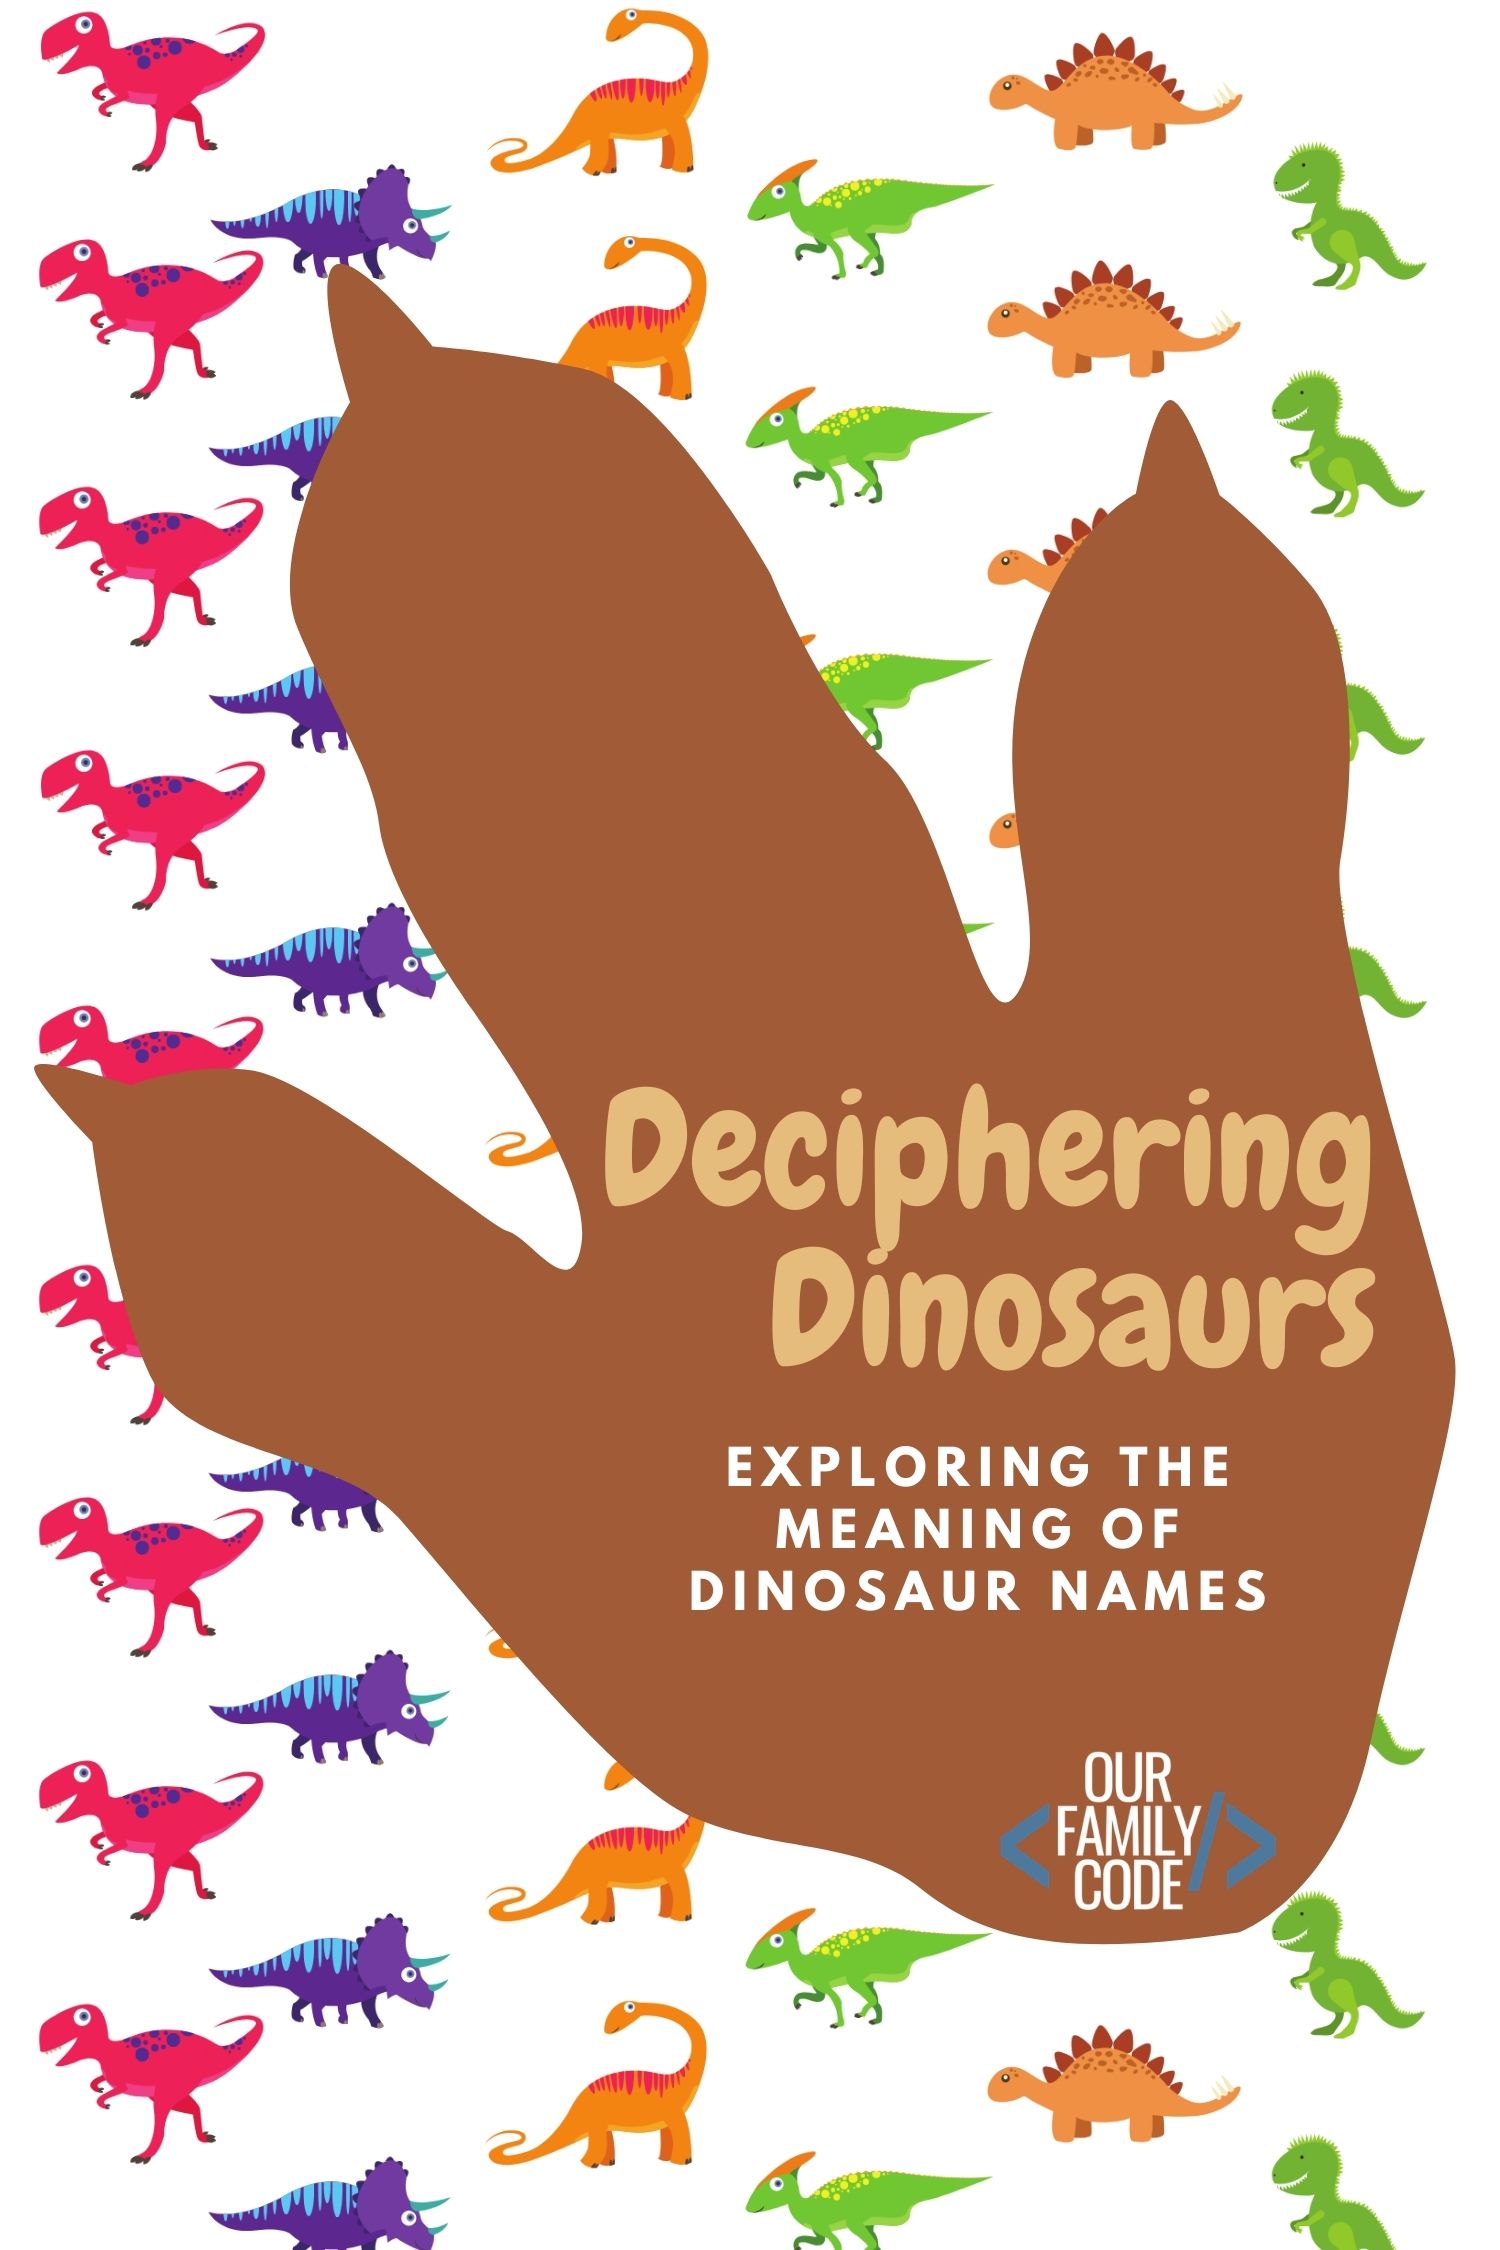 Learn what's in a dinosaur name with this latin word activity. #magictreehouse #dinosauractivities #firstgradeactivity